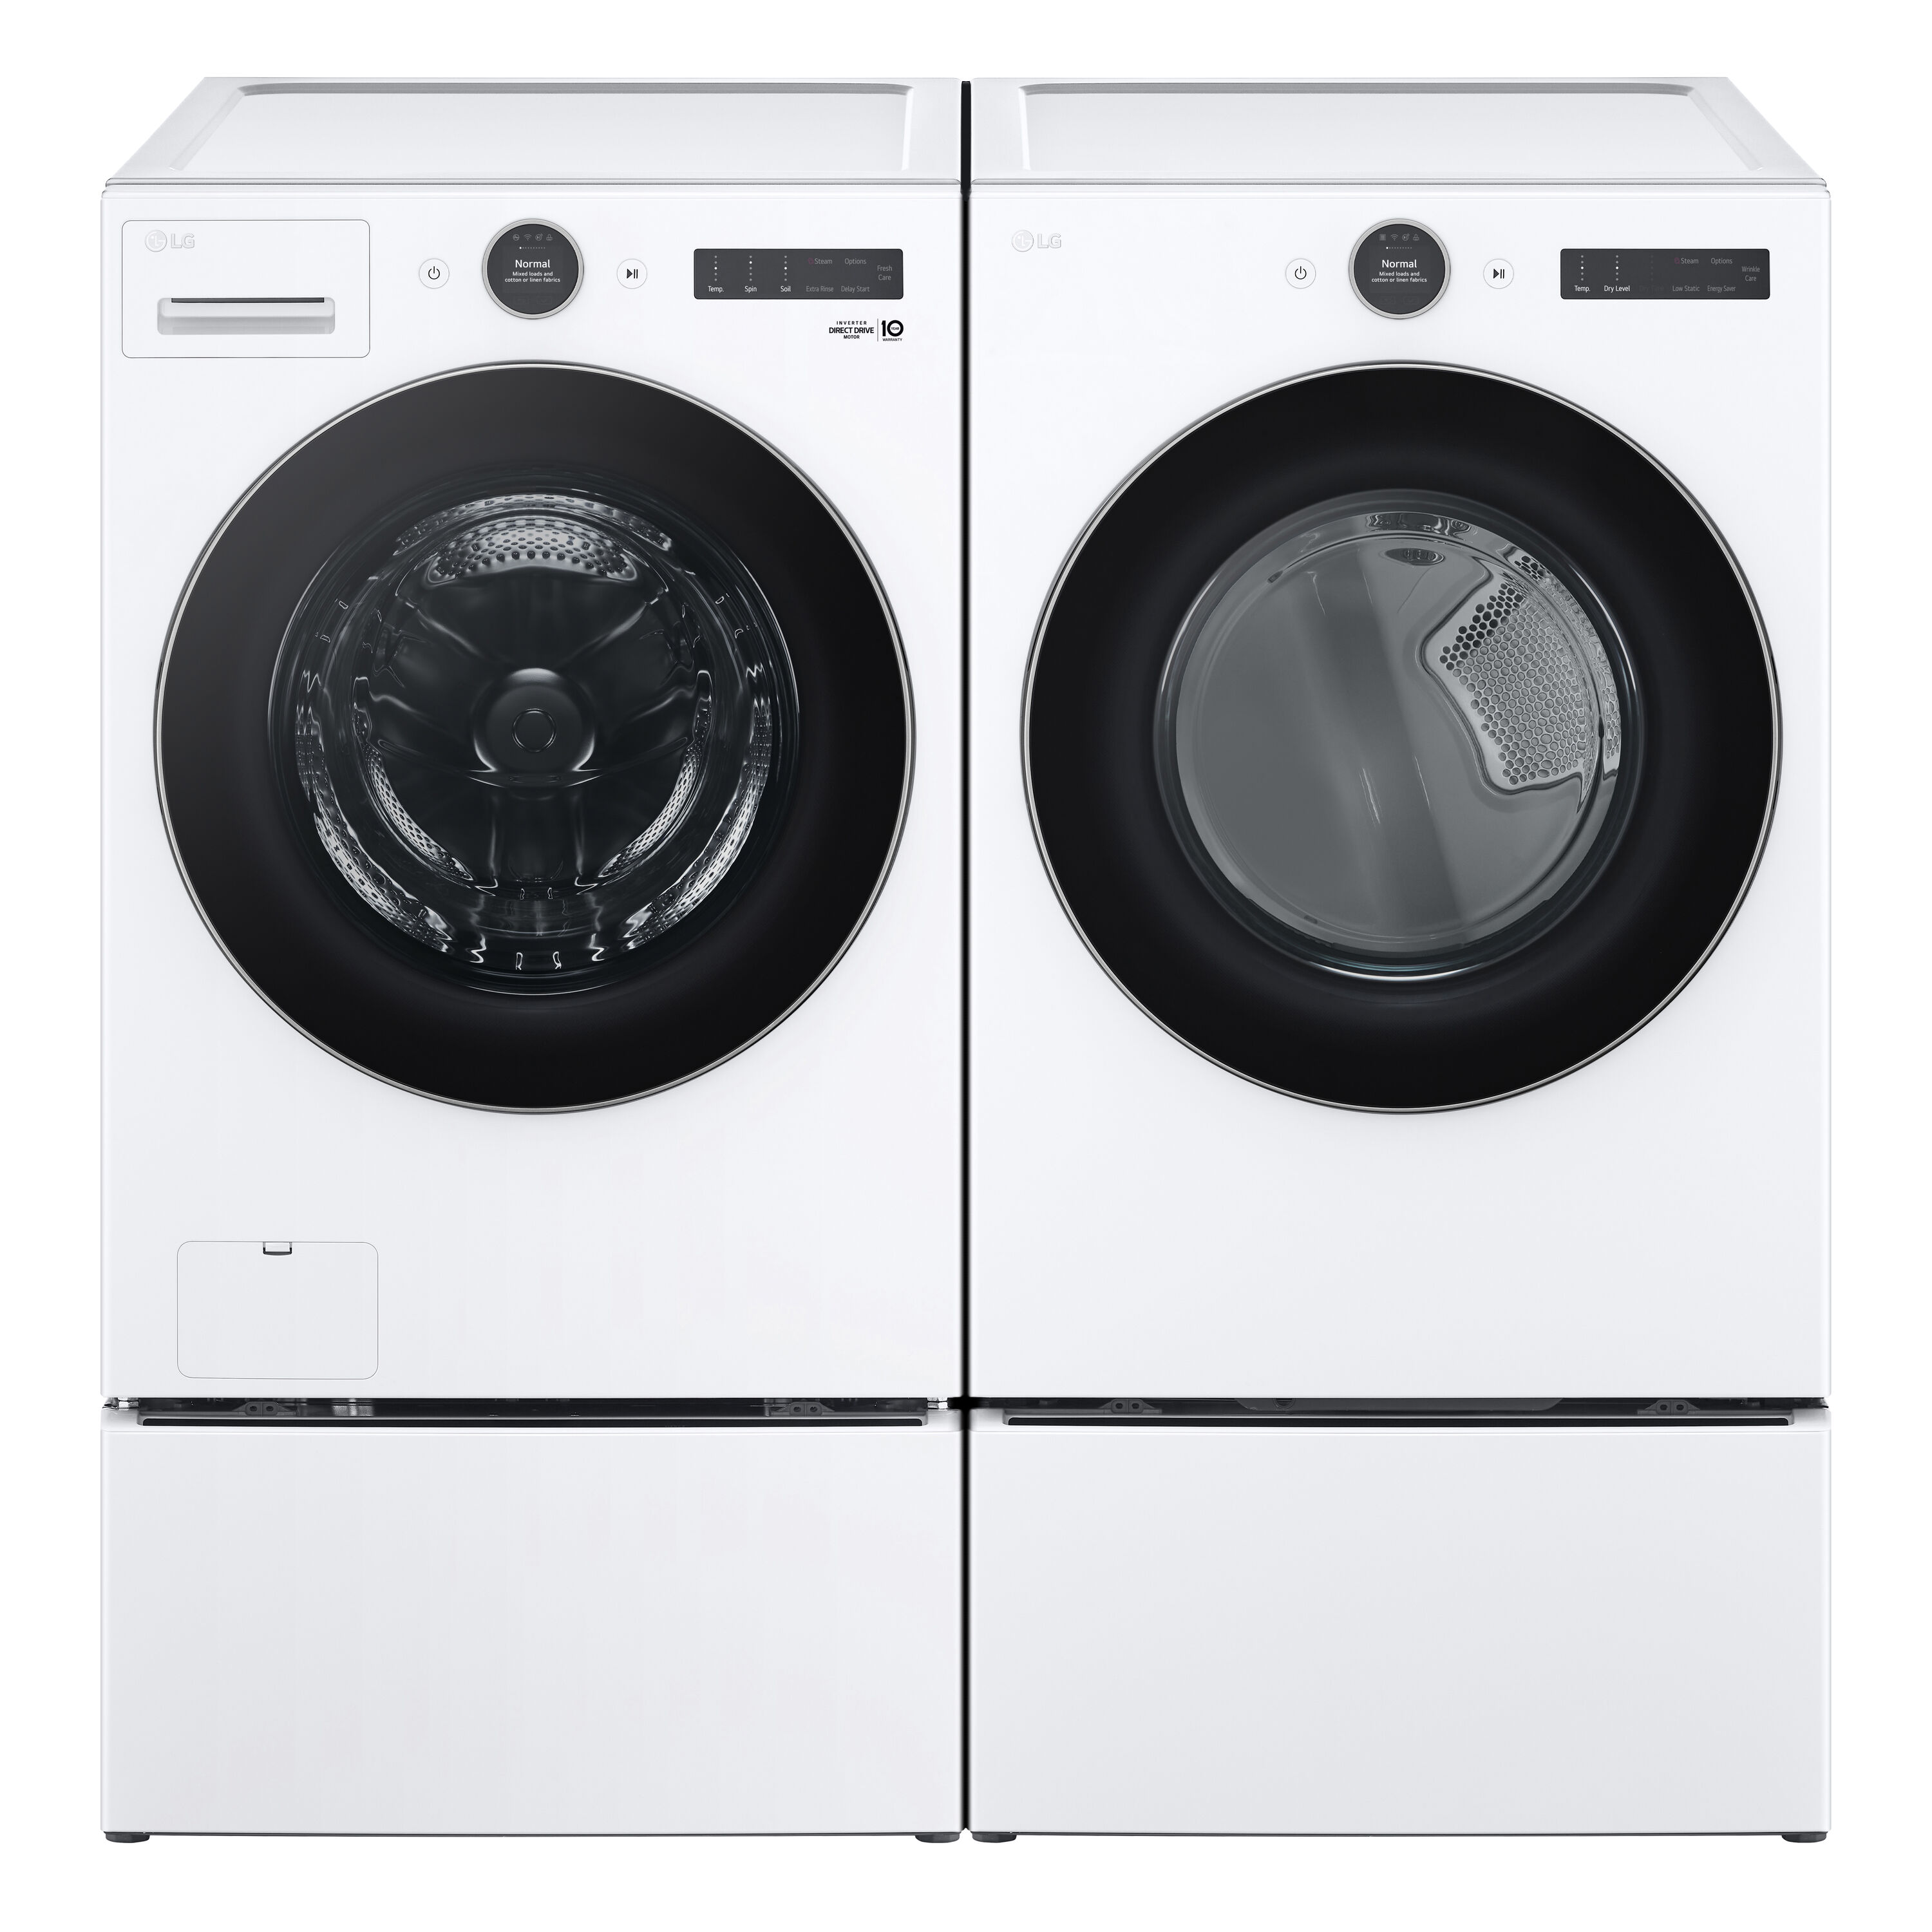 shop-lg-lg-top-load-turbowash-he-steam-white-washer-dryer-at-lowes